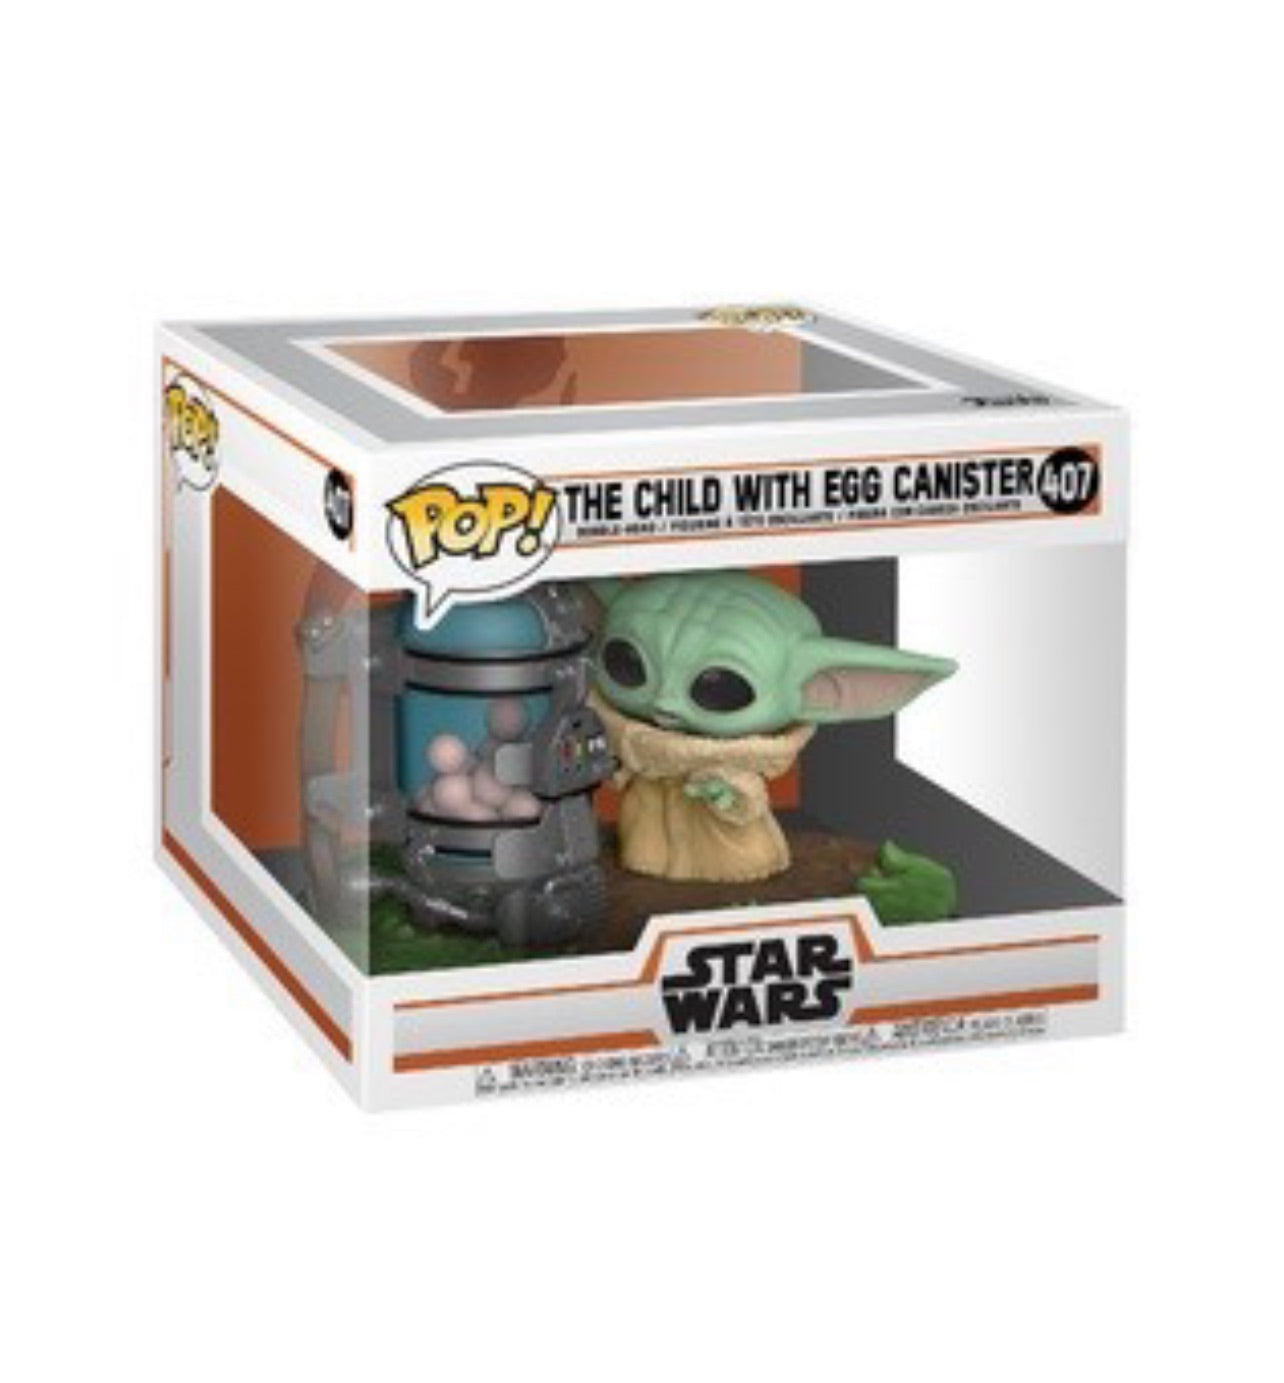 POP! Star Wars Mandalorian The Child w/Egg Cannister #407